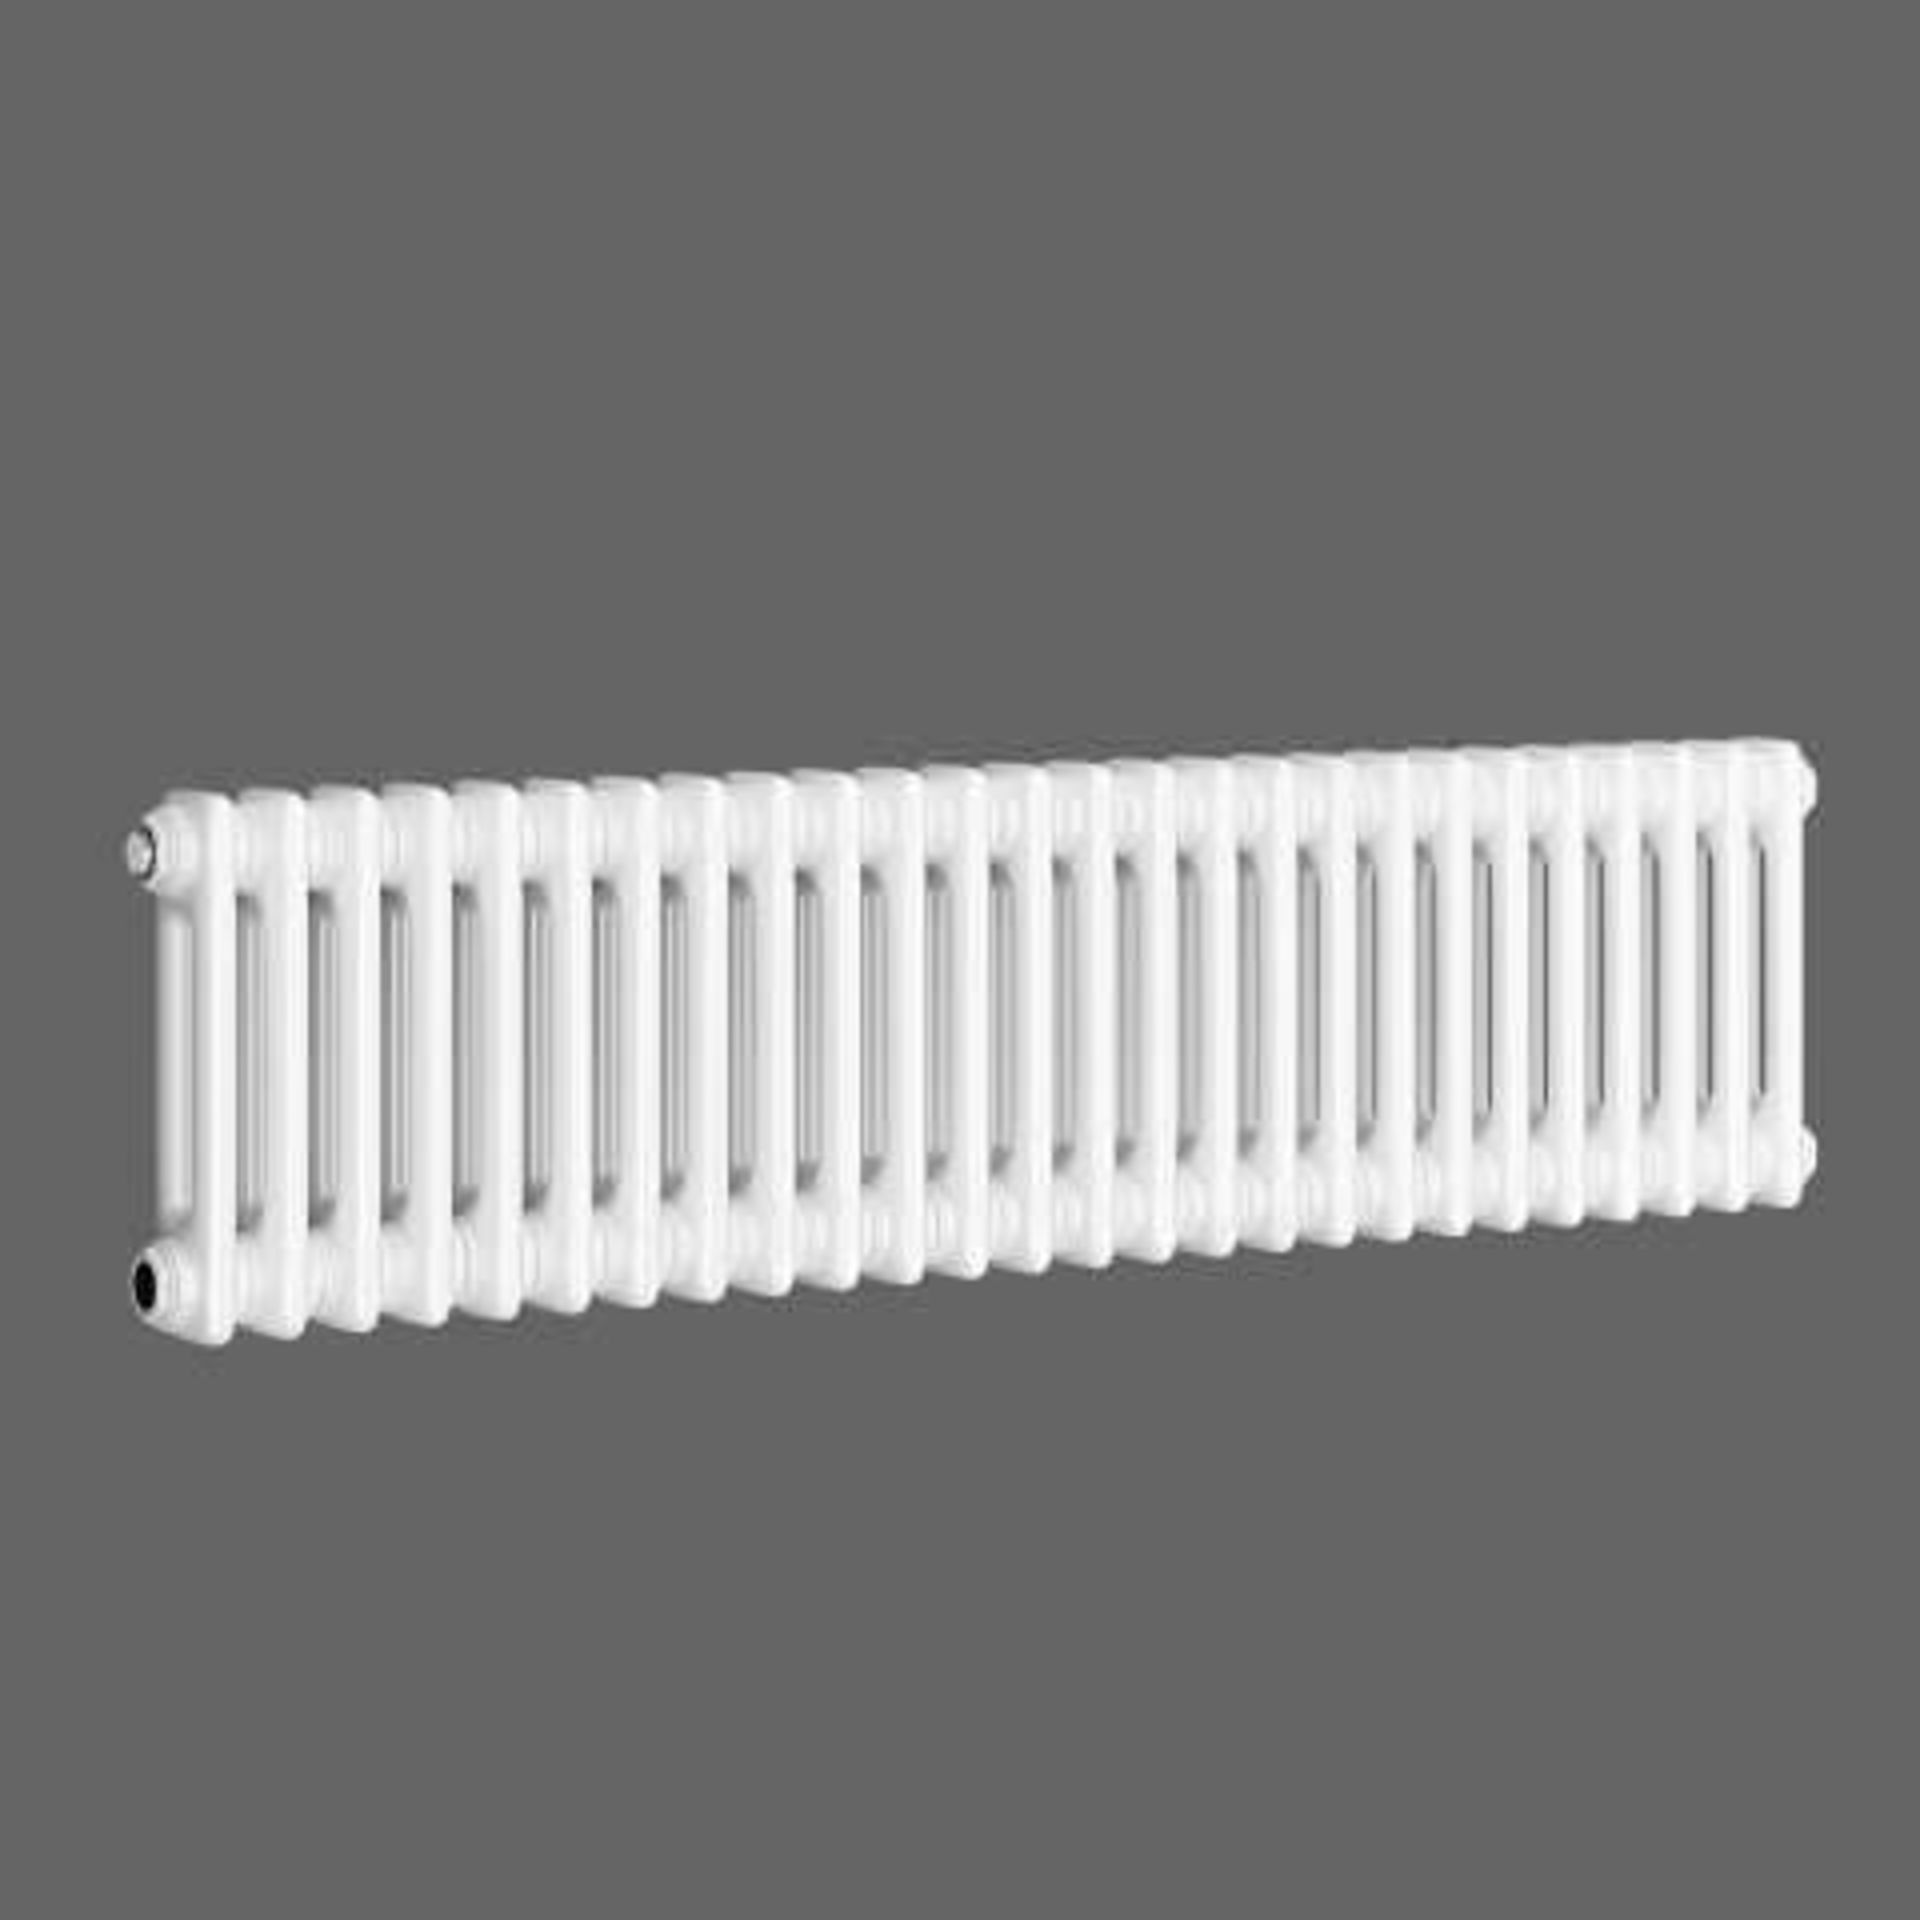 (Y10) 300x1165mm White Double Panel Horizontal Colosseum Traditional Radiator. RRP £379.99. - Image 2 of 3